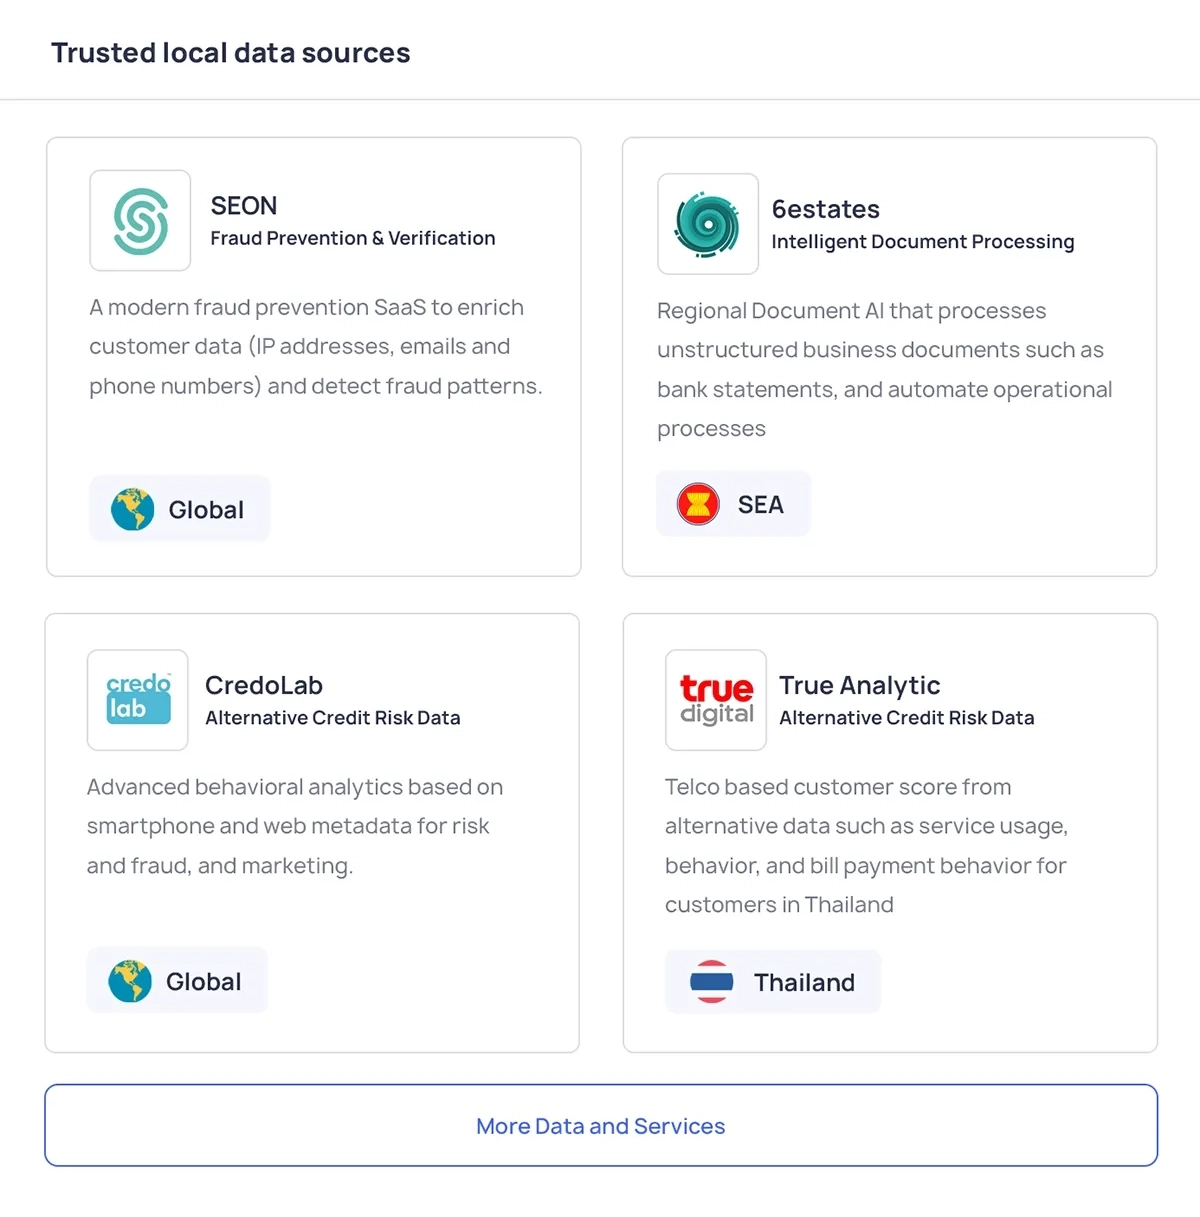 Pick fraud services and trusted local data sources as you expand